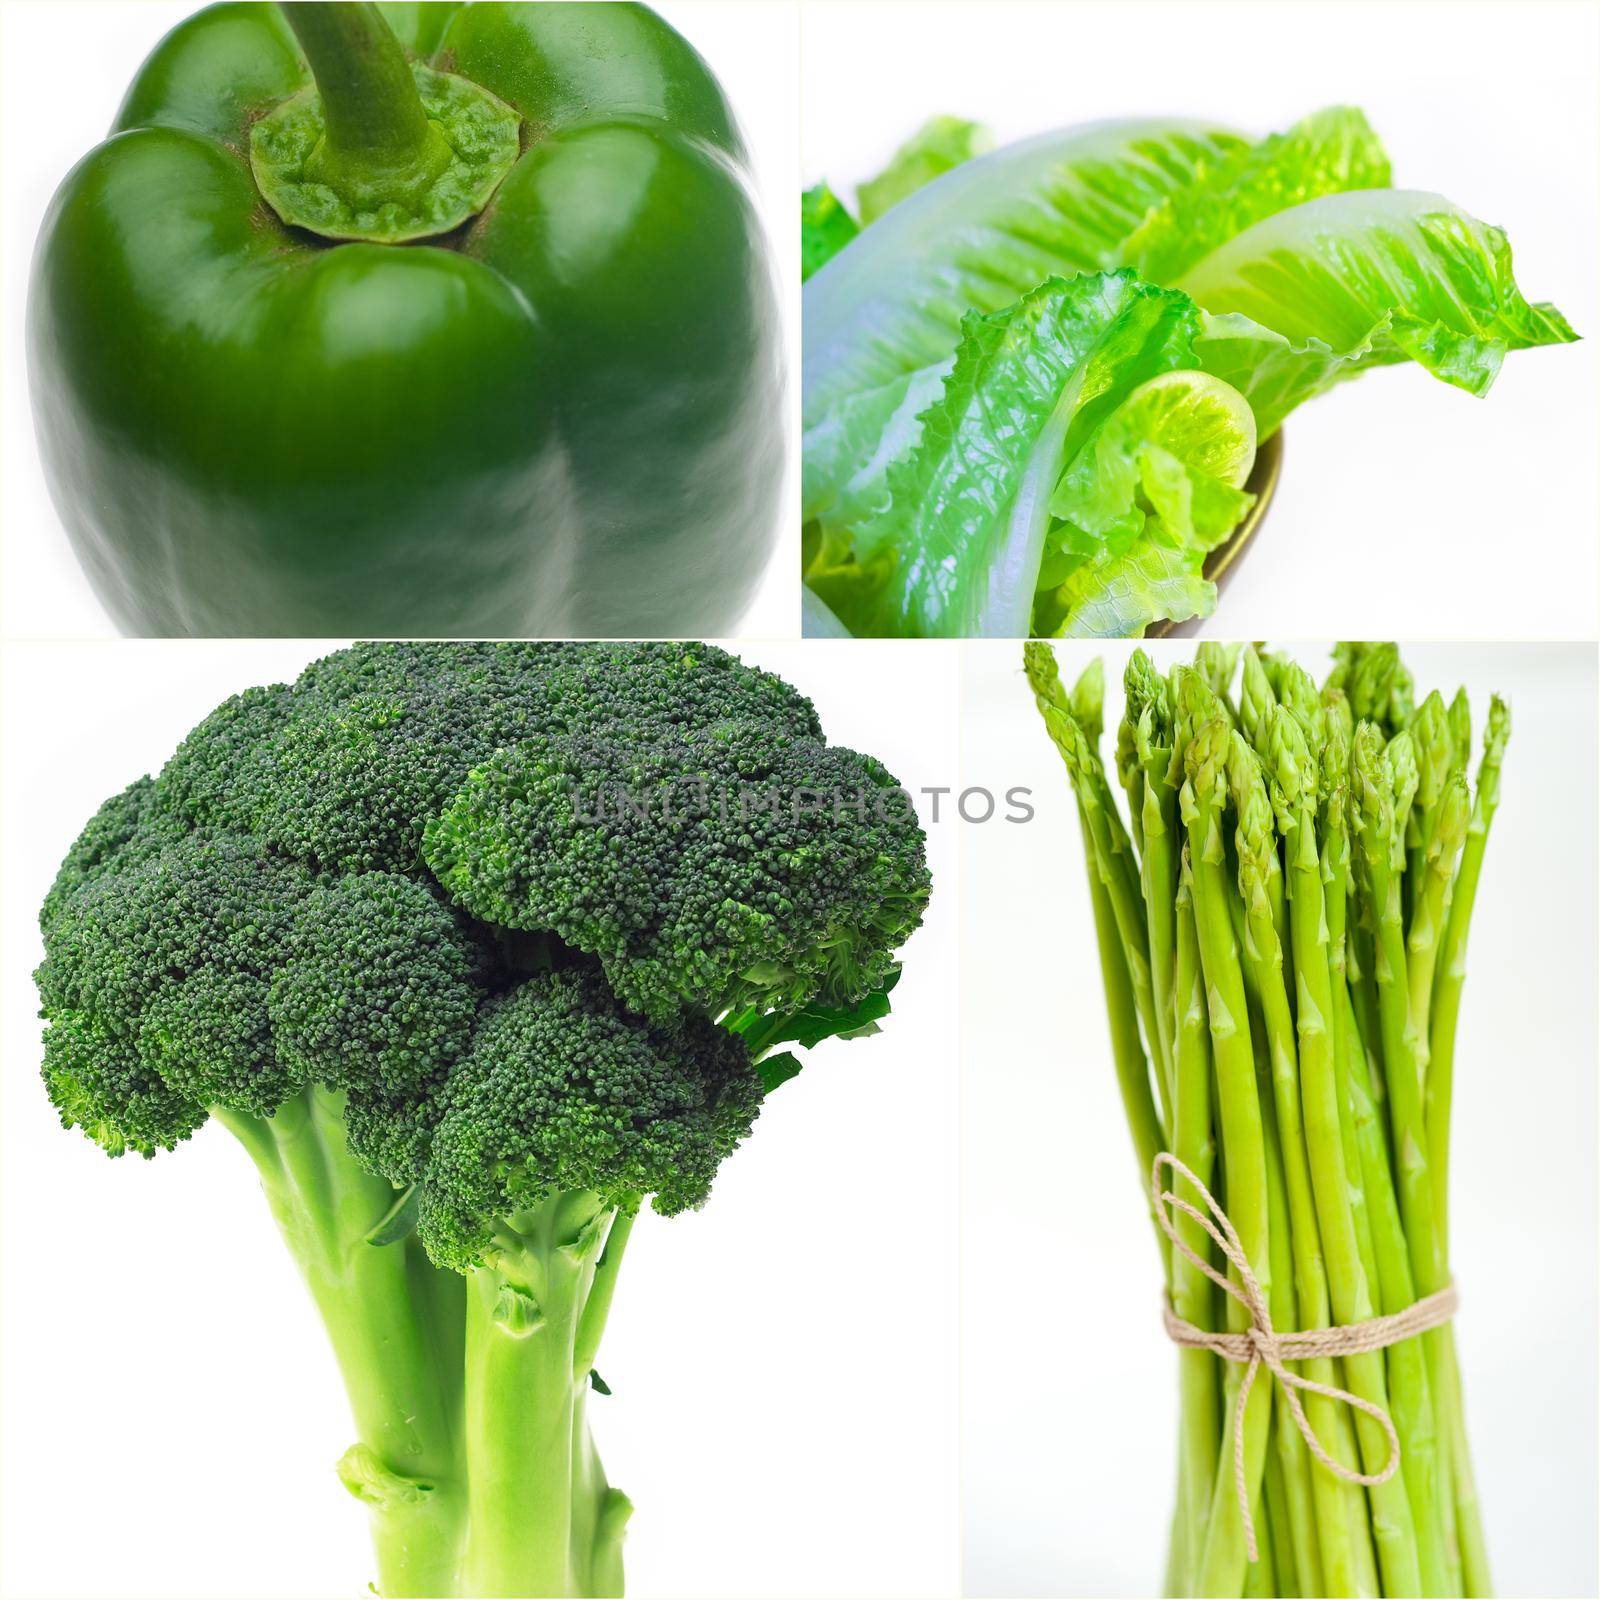 green healthy food collage collection by keko64